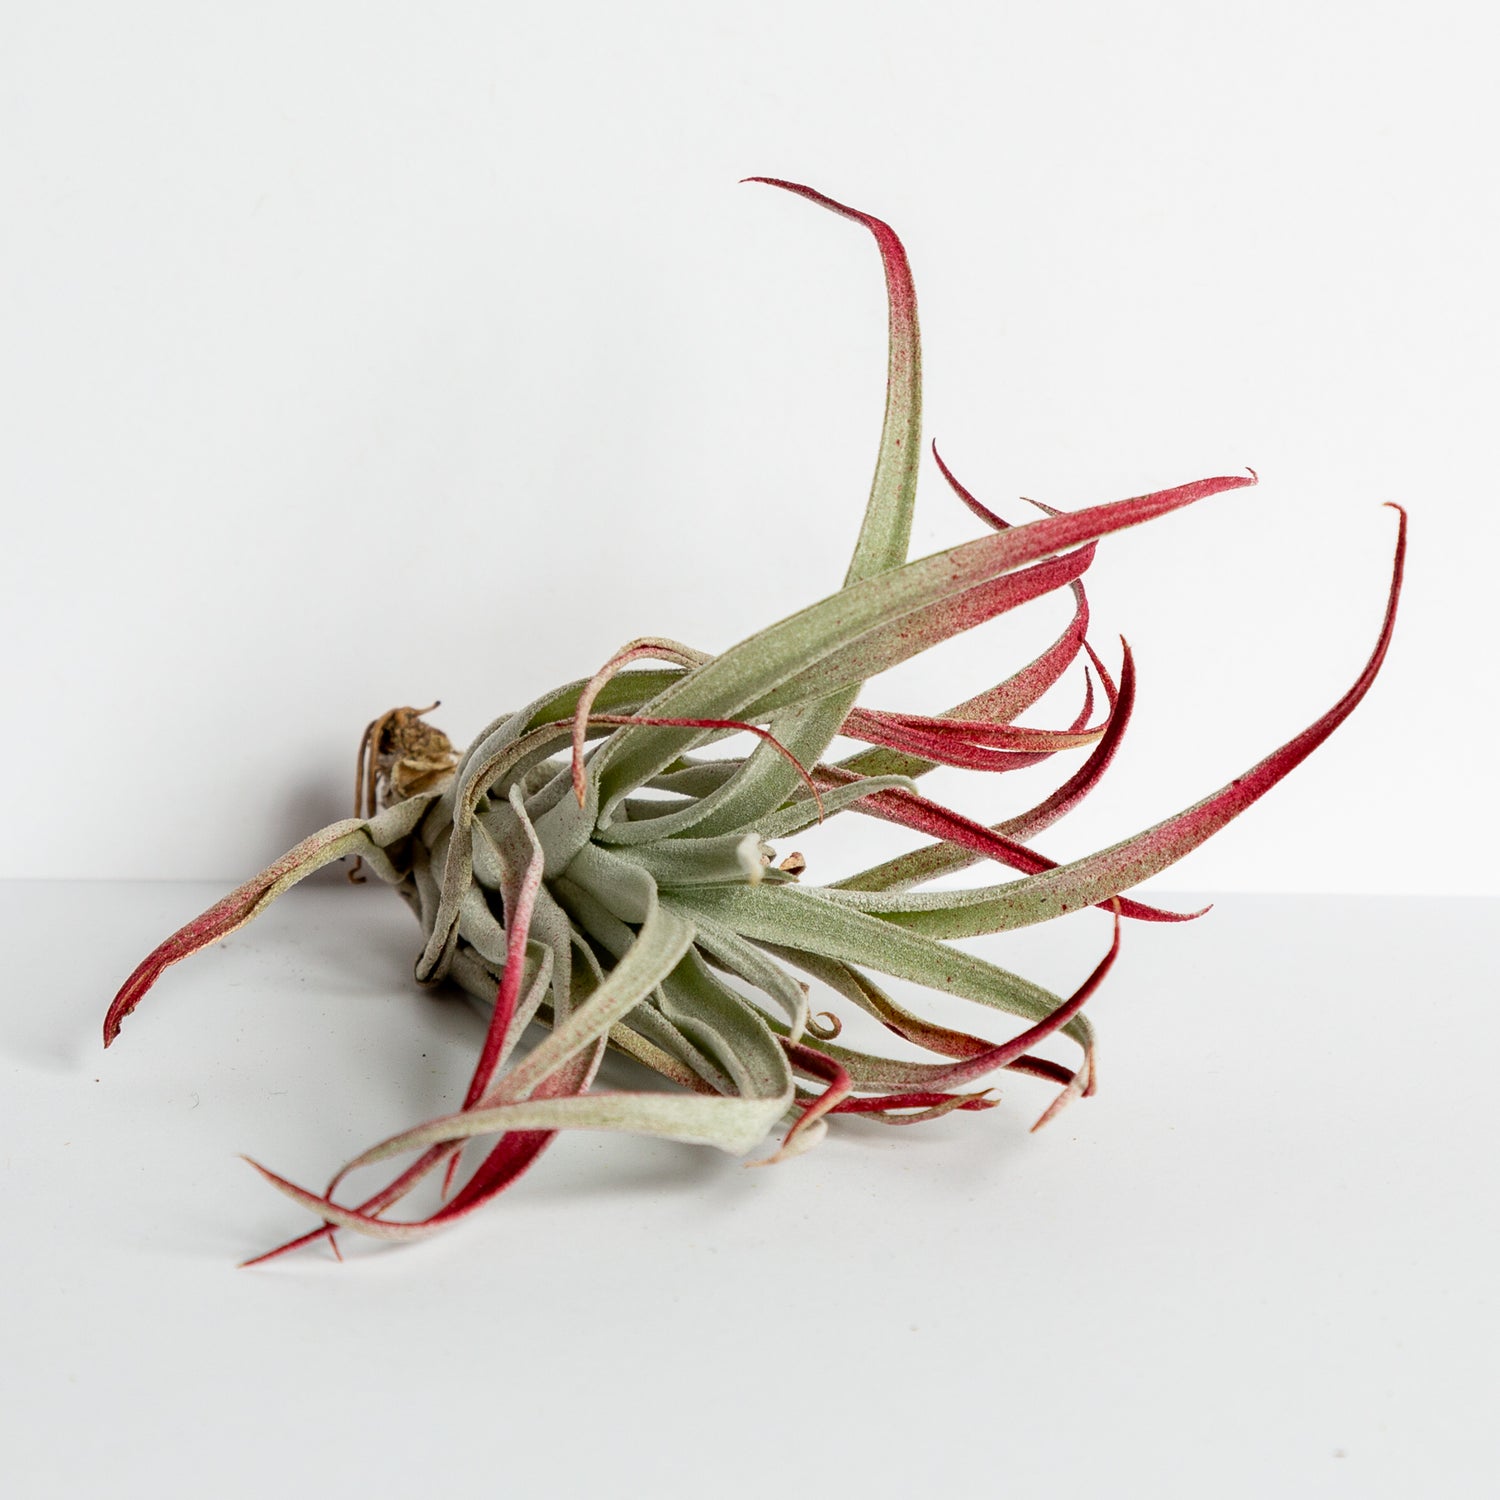 Air Plant 'Harrisii - Red' 4-5" - Urban Sprouts